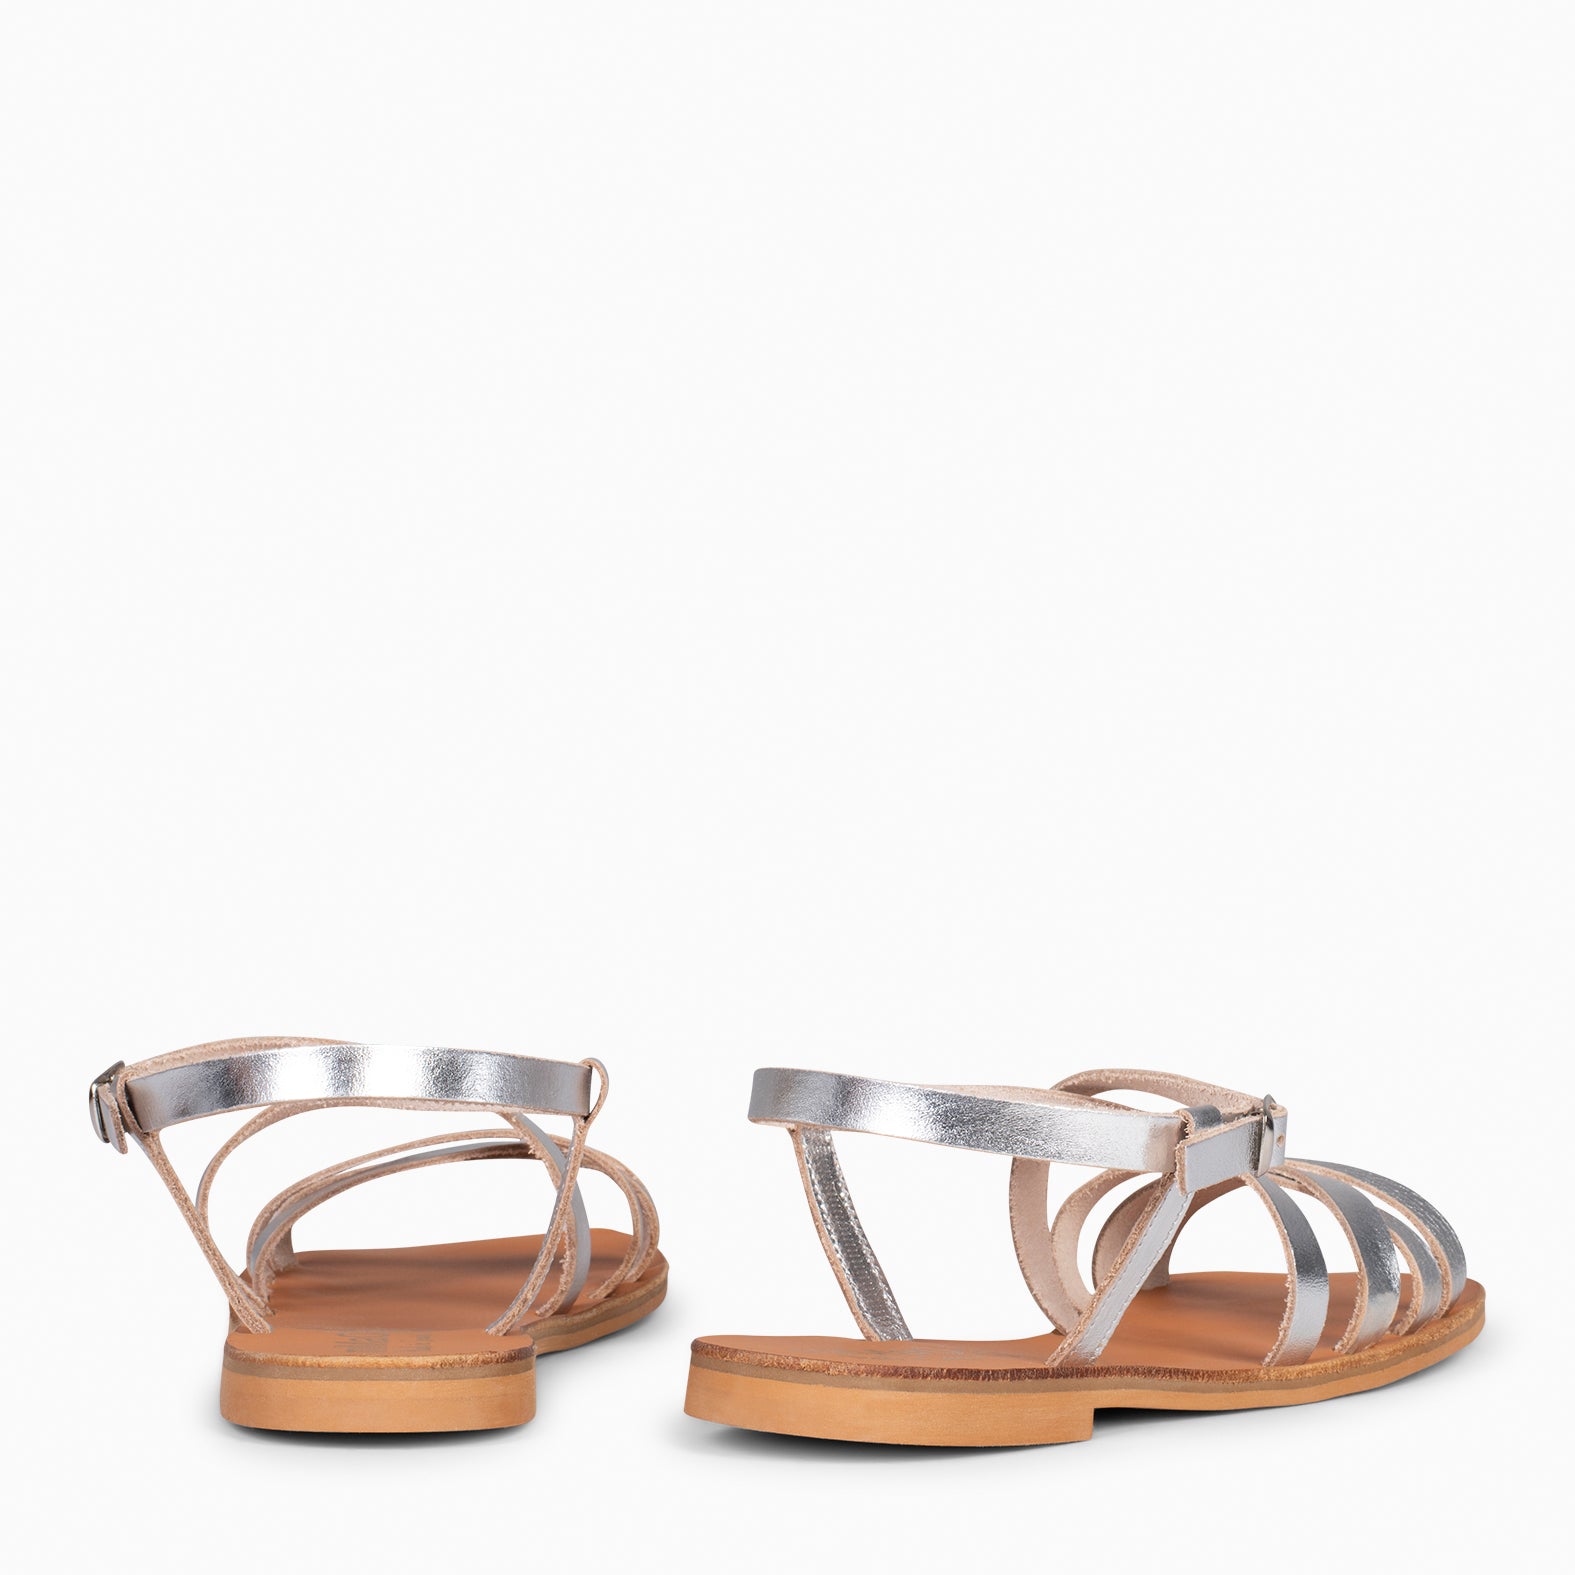 IXORA – SILVER flat sandals with buckle